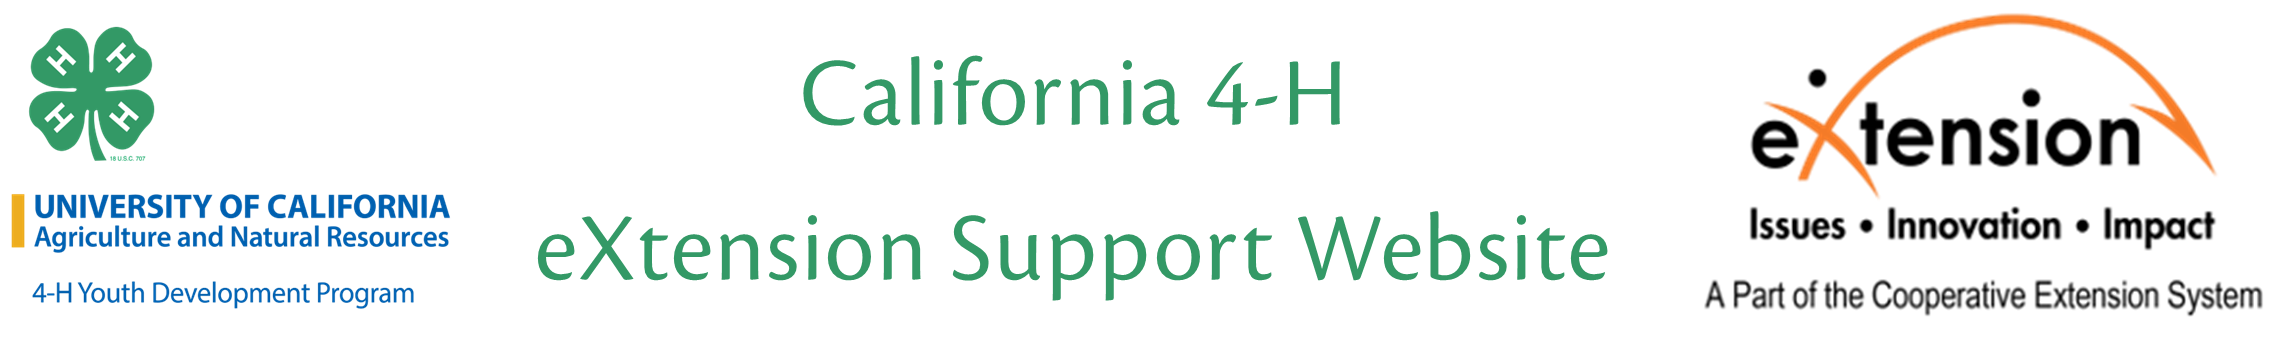 CA 4-H eXtension Support Logo